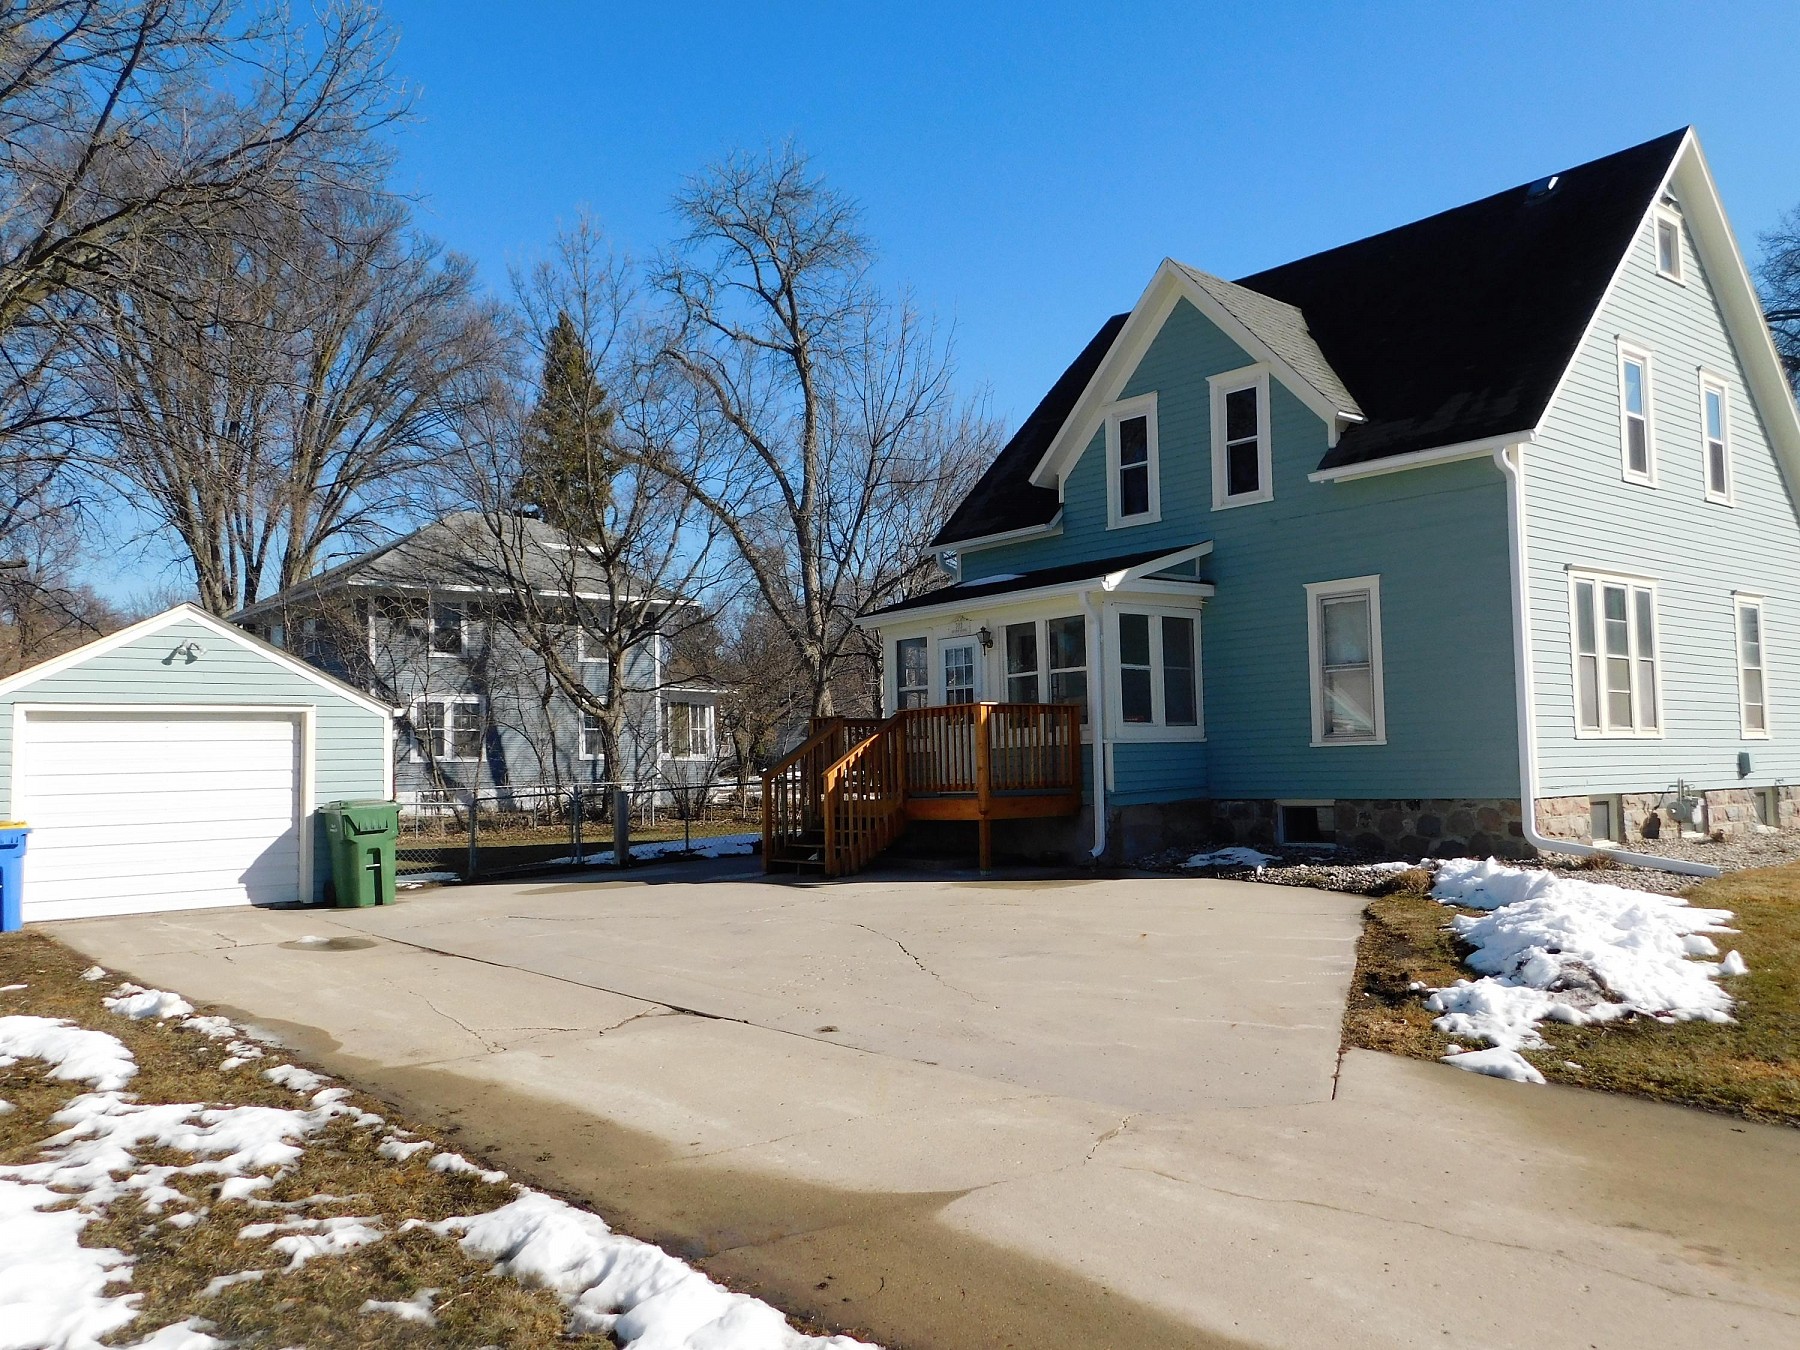 703 7th Avenue, Brookings, SD 57006